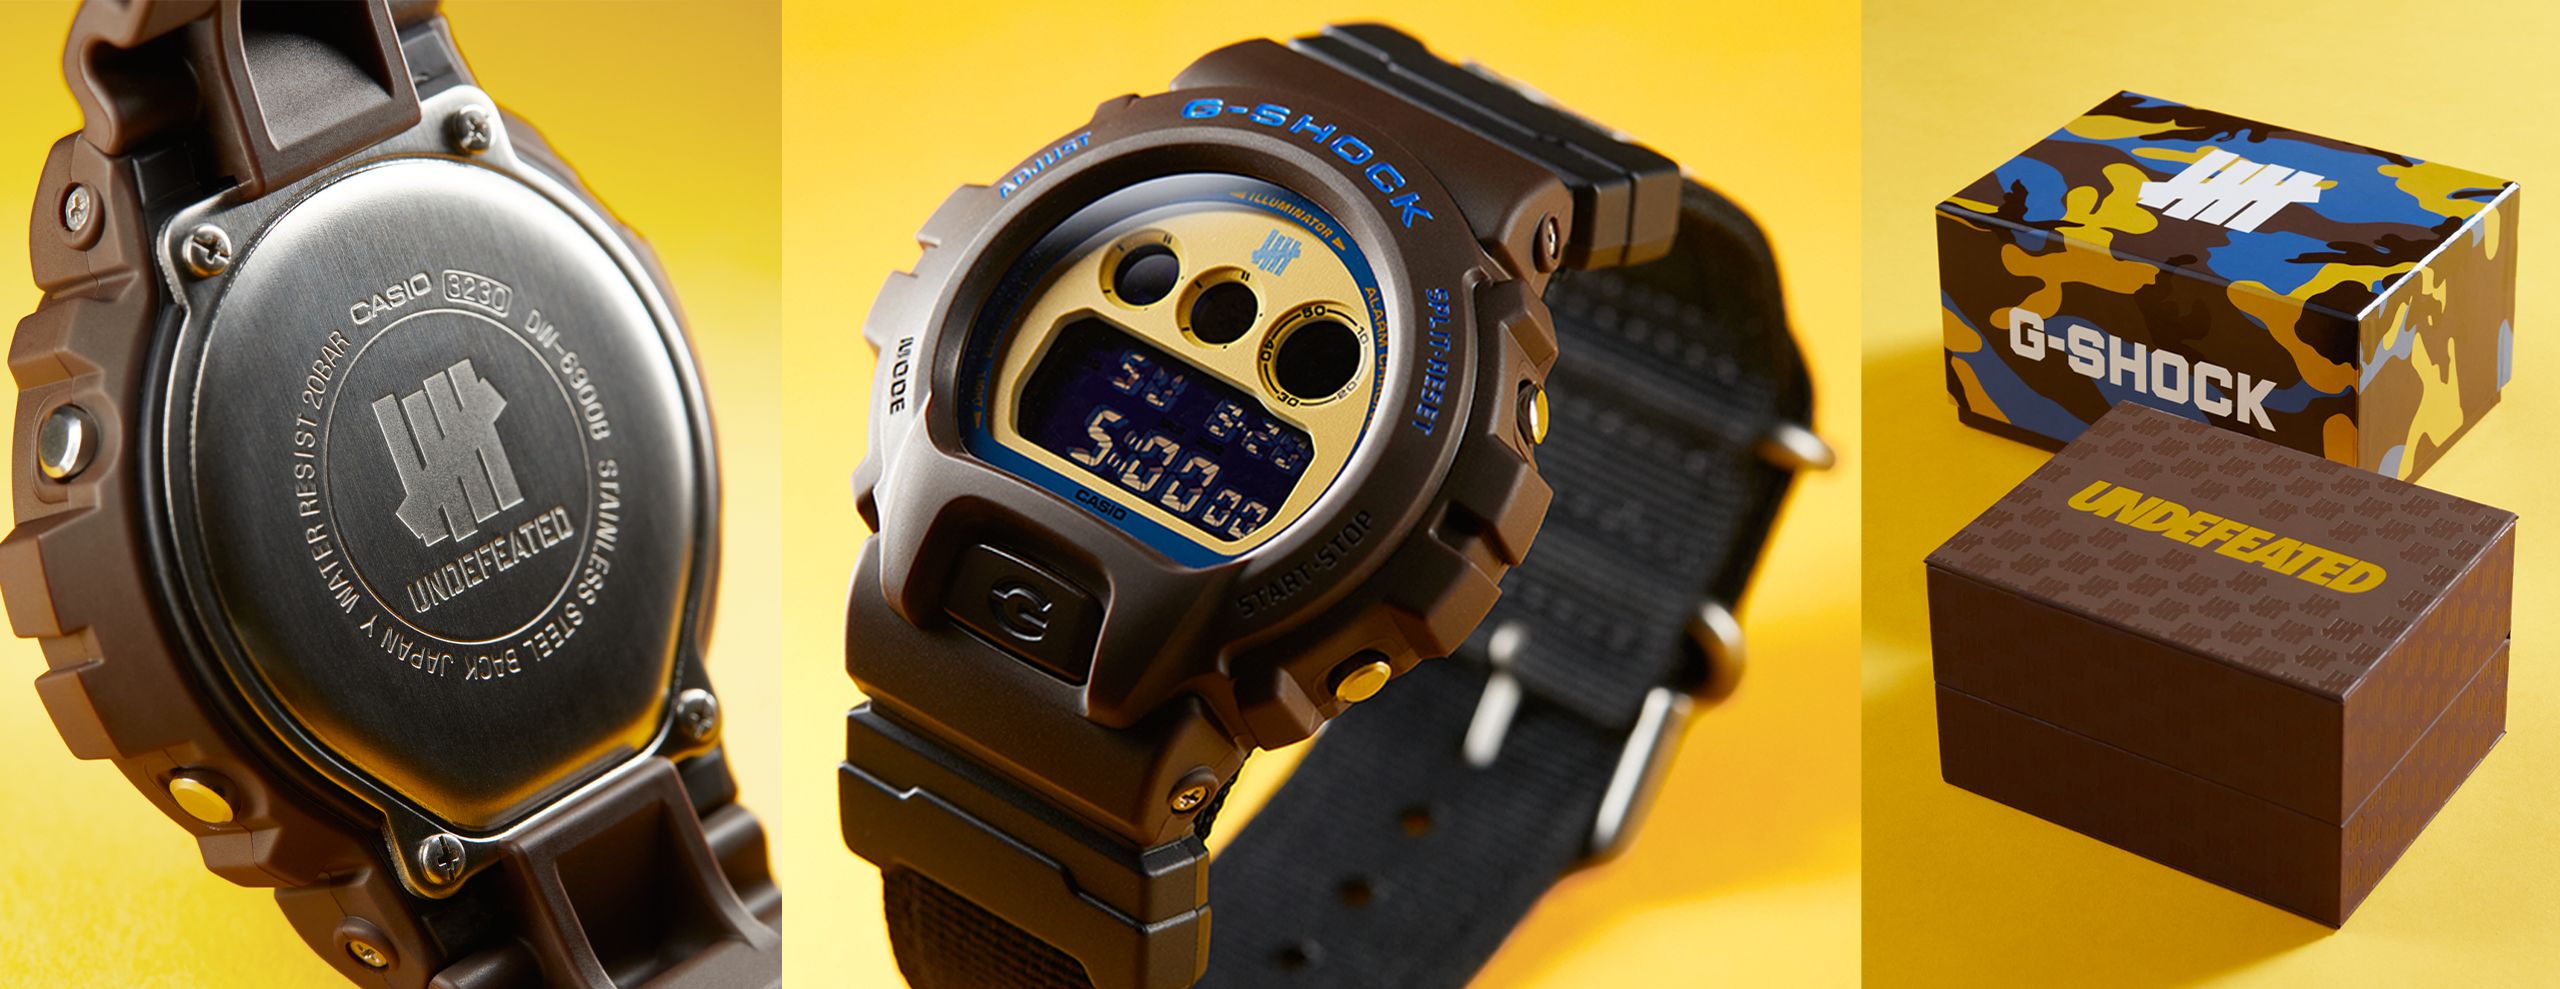 Casio G-SHOCK and UNDEFEATED Drop New Limited-Edition Anniversary Watch